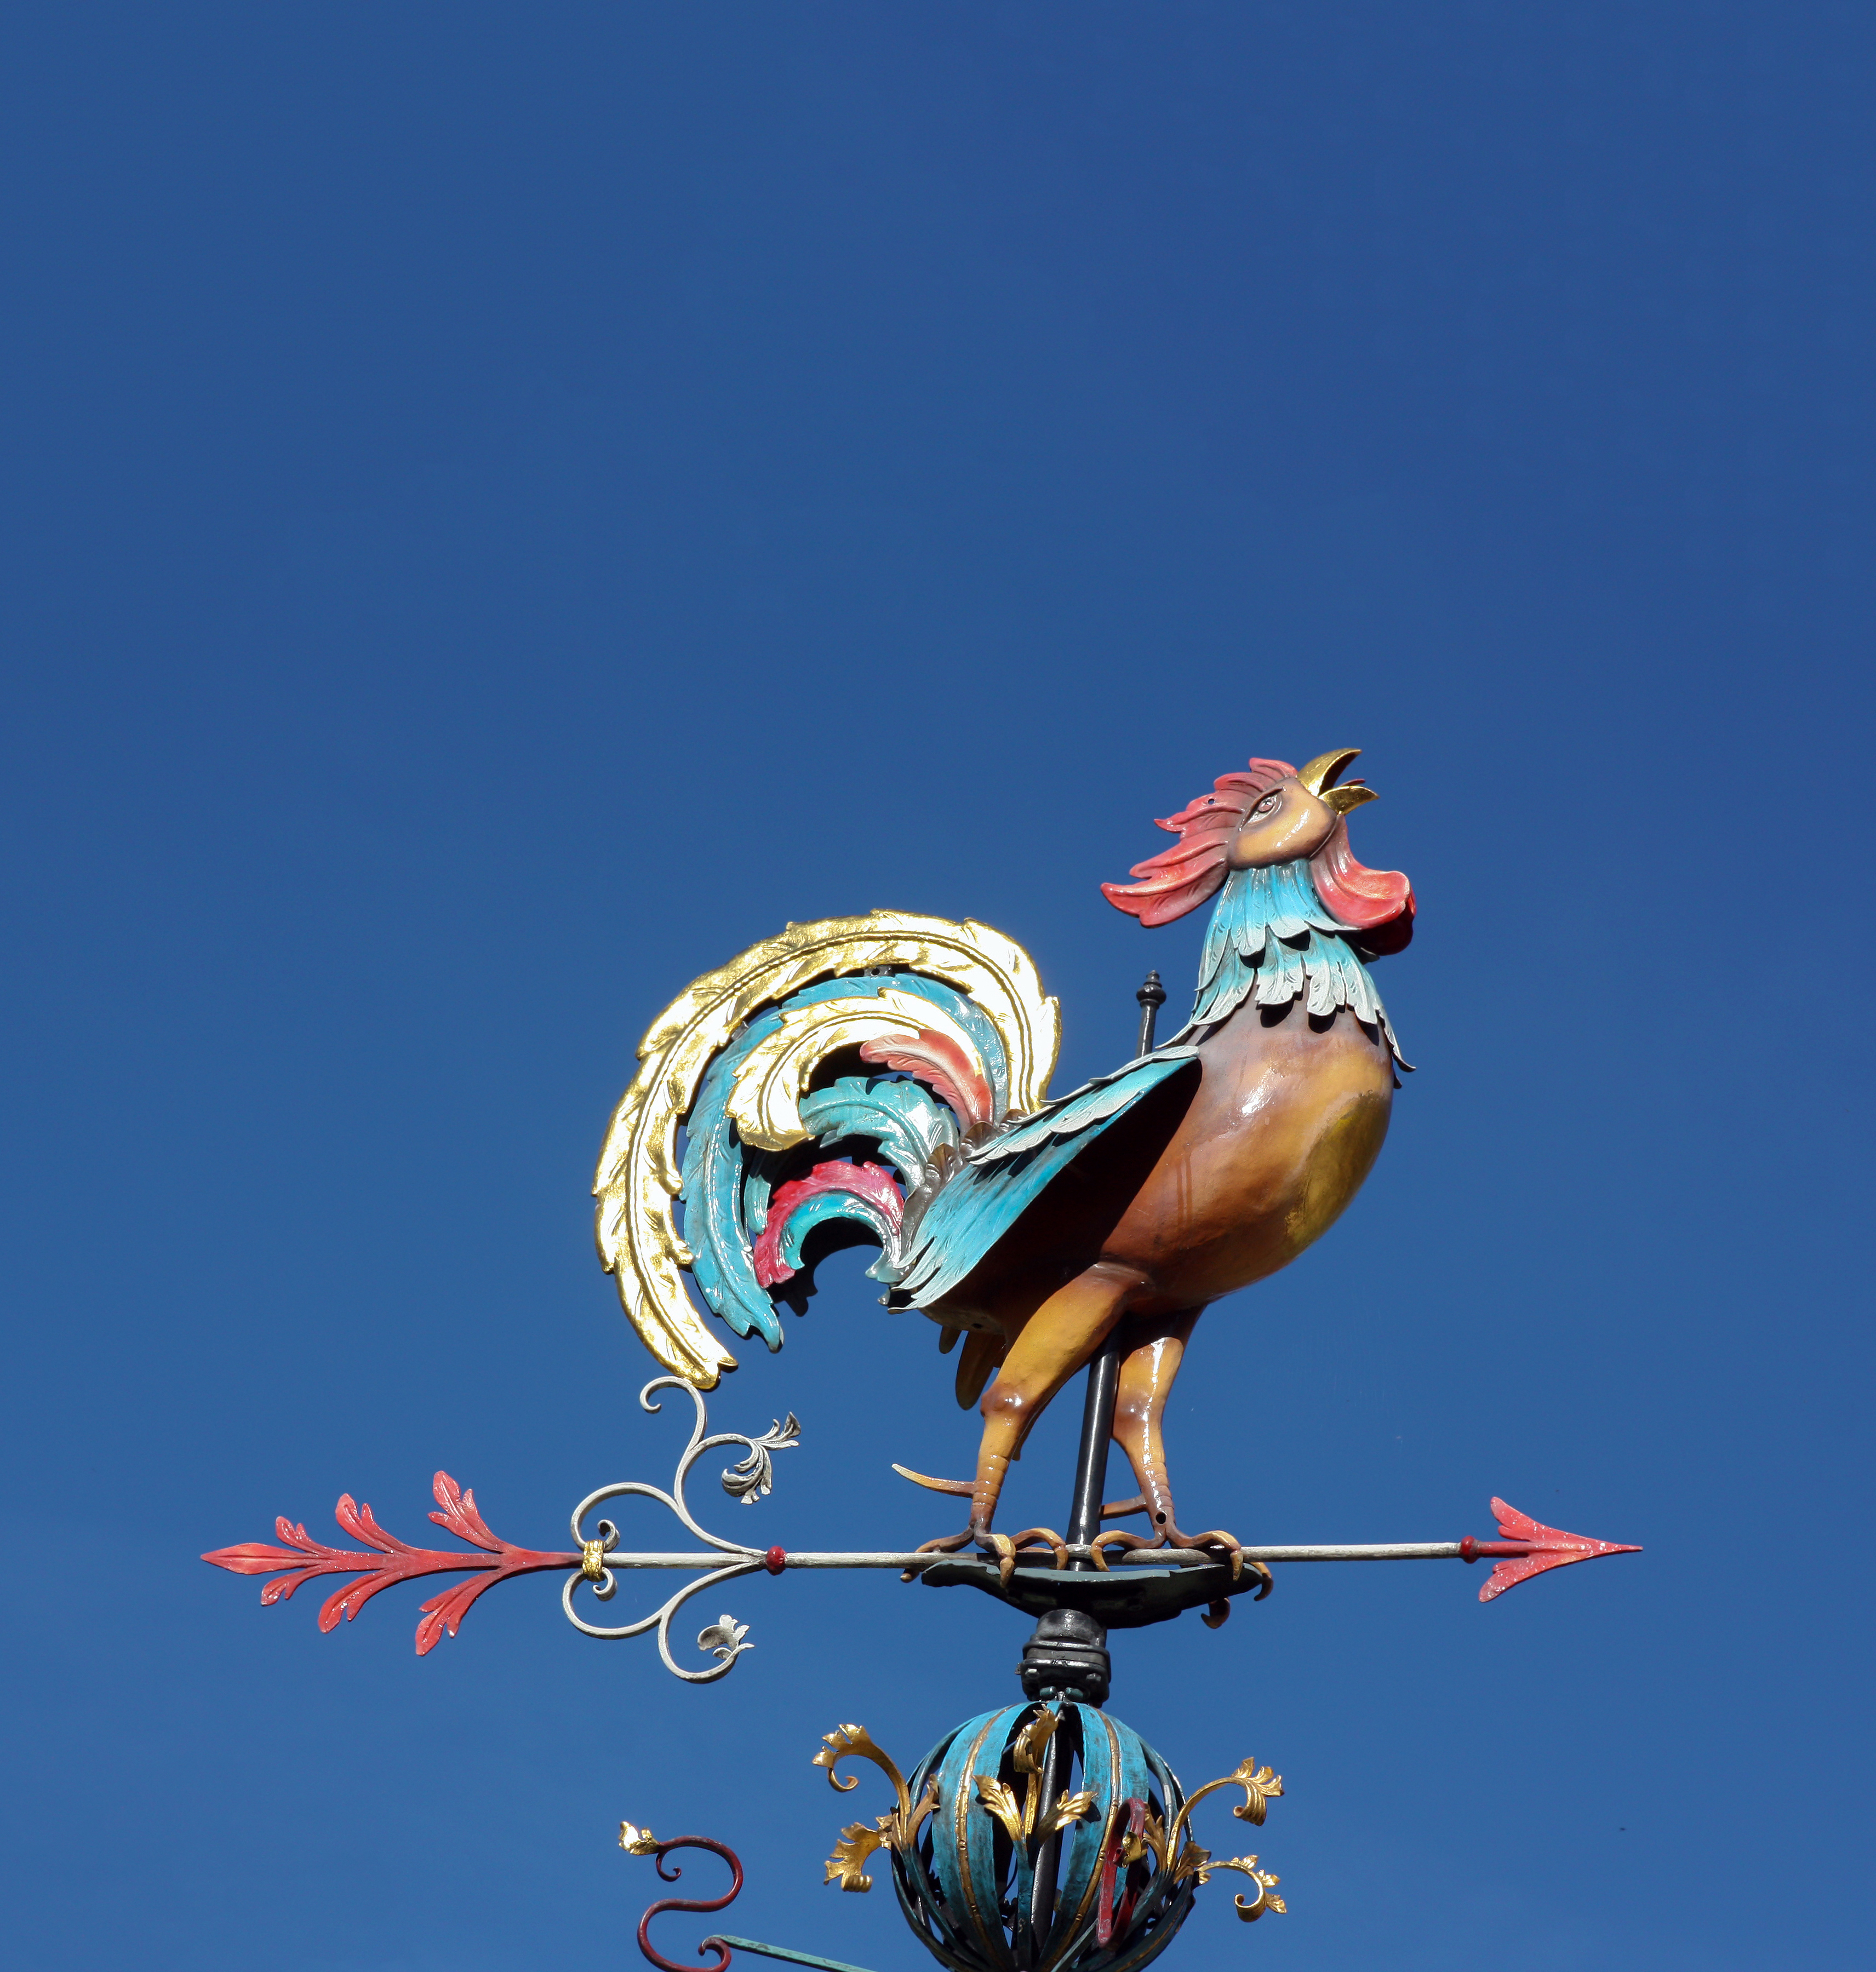 Folklore of Cocks or Roosters on Weathervanes | Cocks, Cockcrows, and Weathercocks ...3424 x 3600